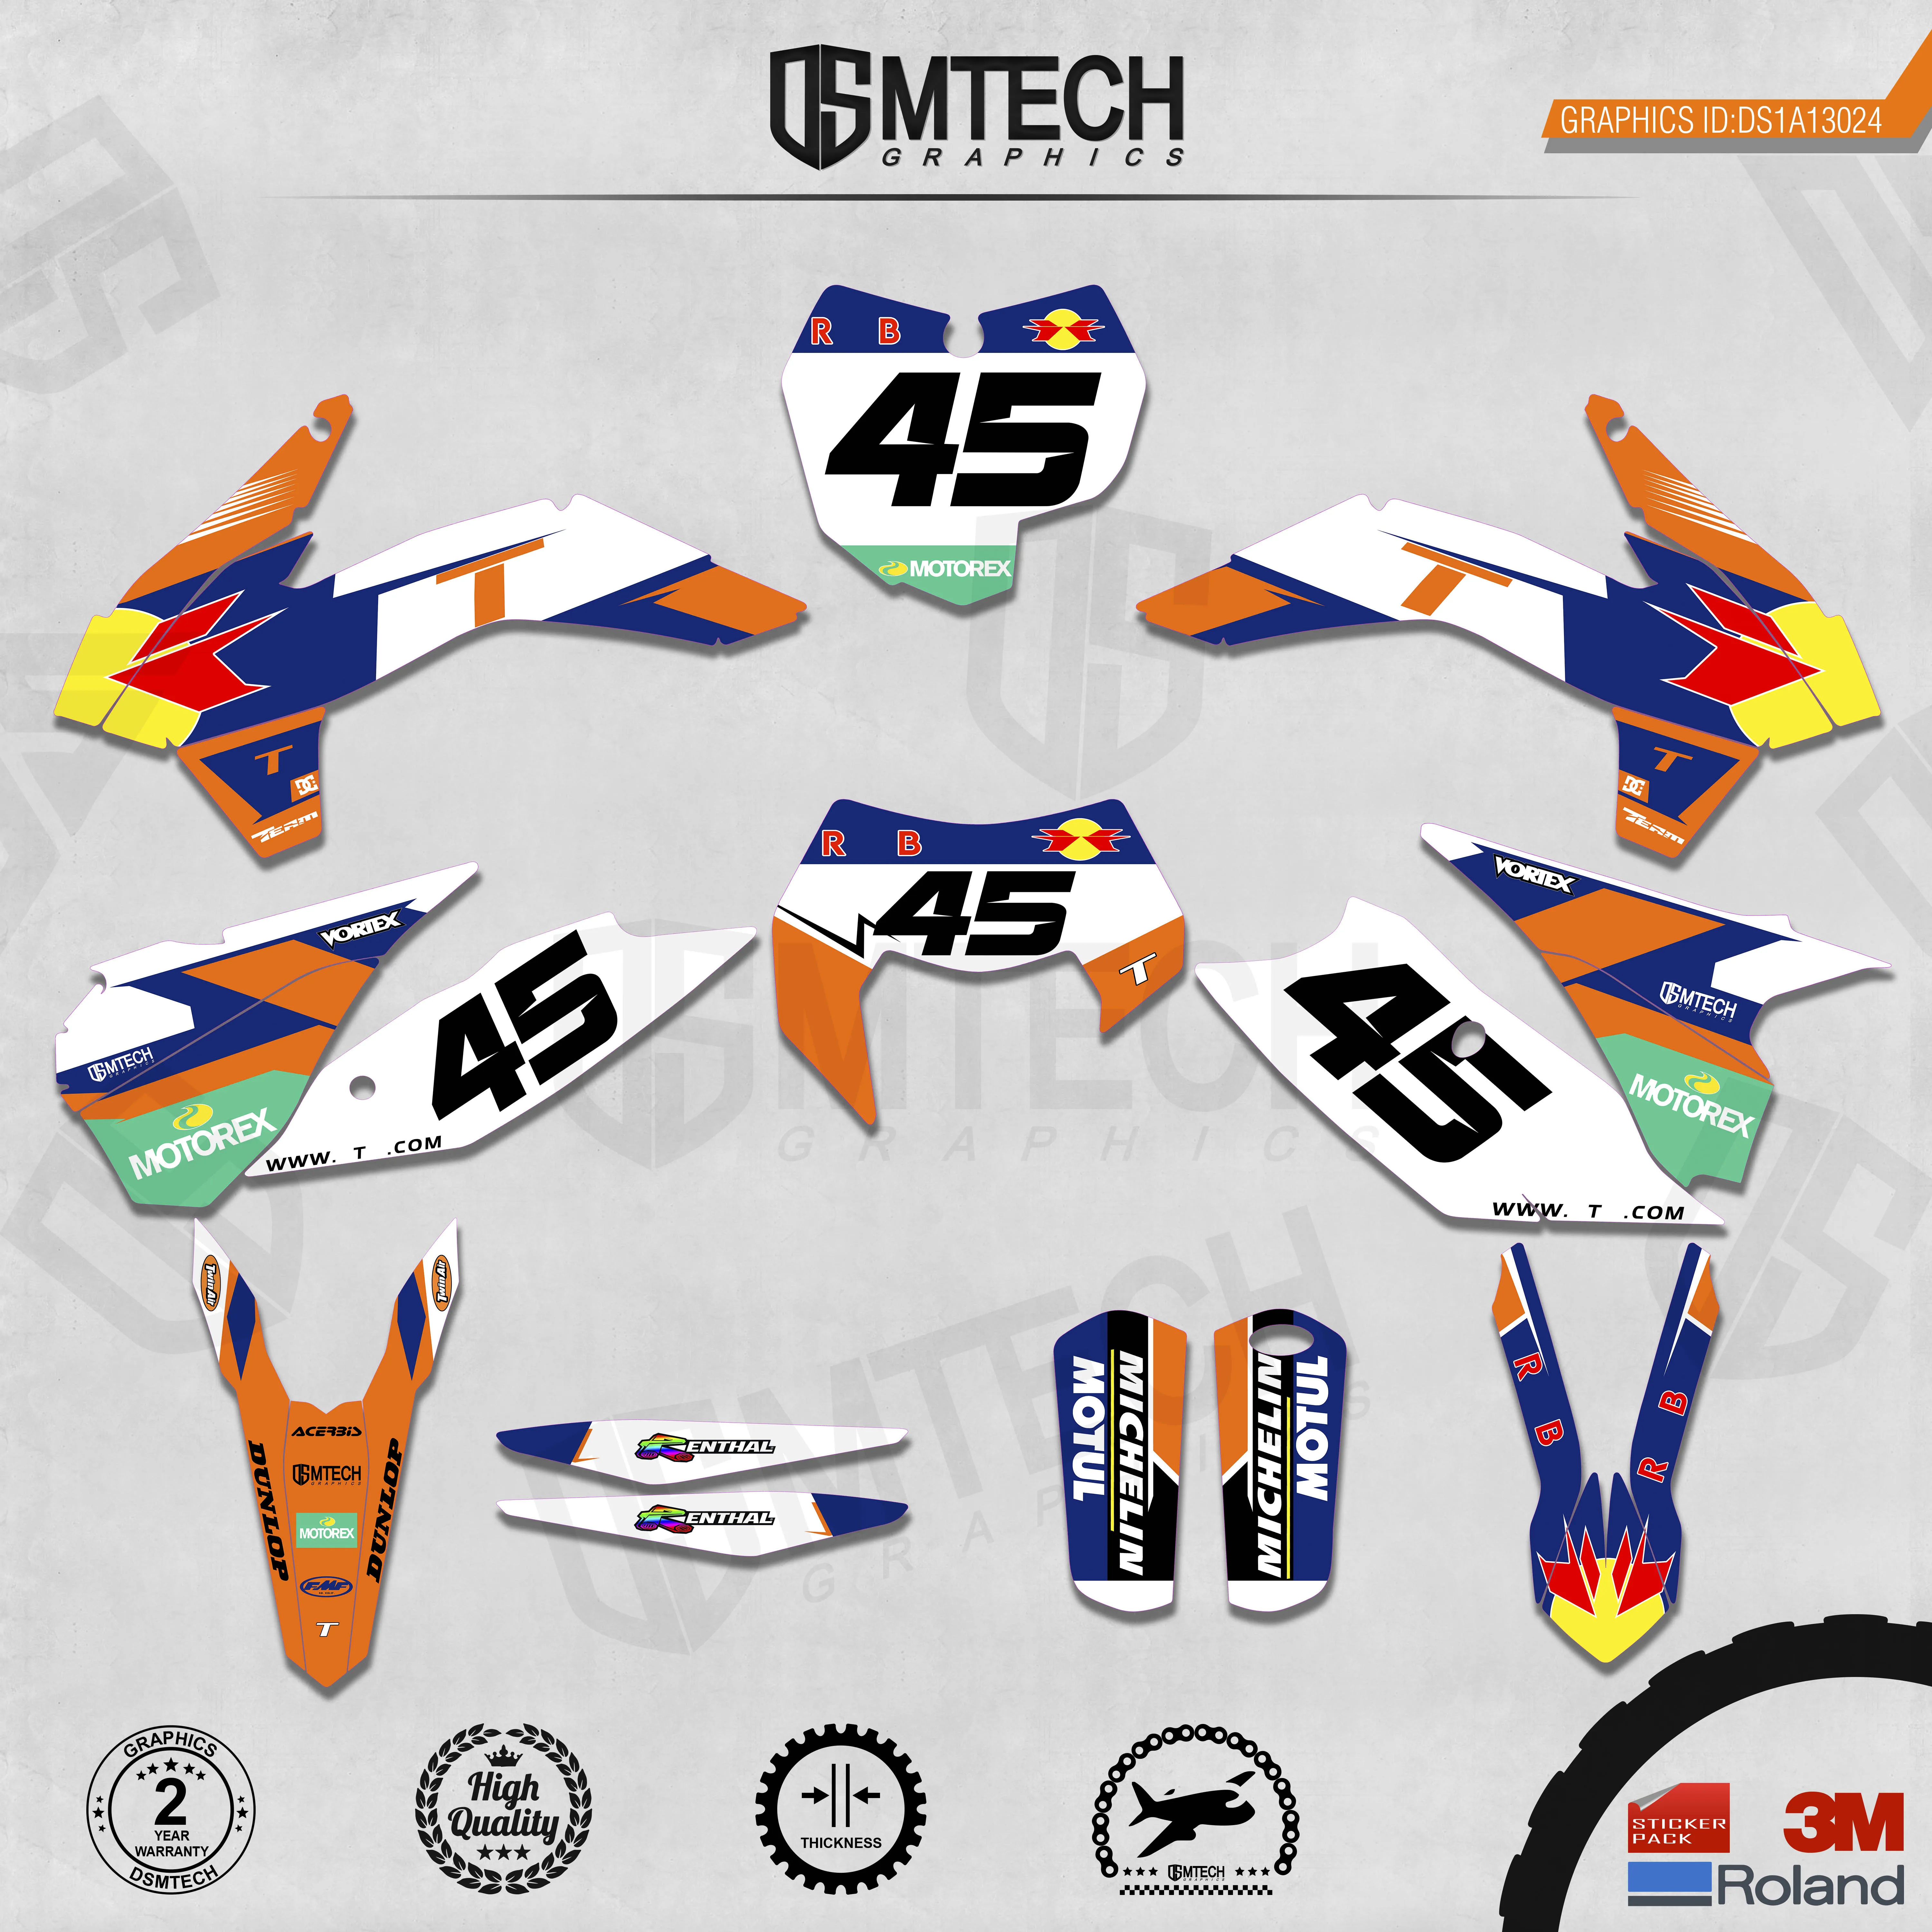 DSMTECH Customized Team Graphics Backgrounds Decals 3M Custom Stickers For 2013-2014 SXF 2015 SXF 2014-2015 EXC 2016 EXC  024